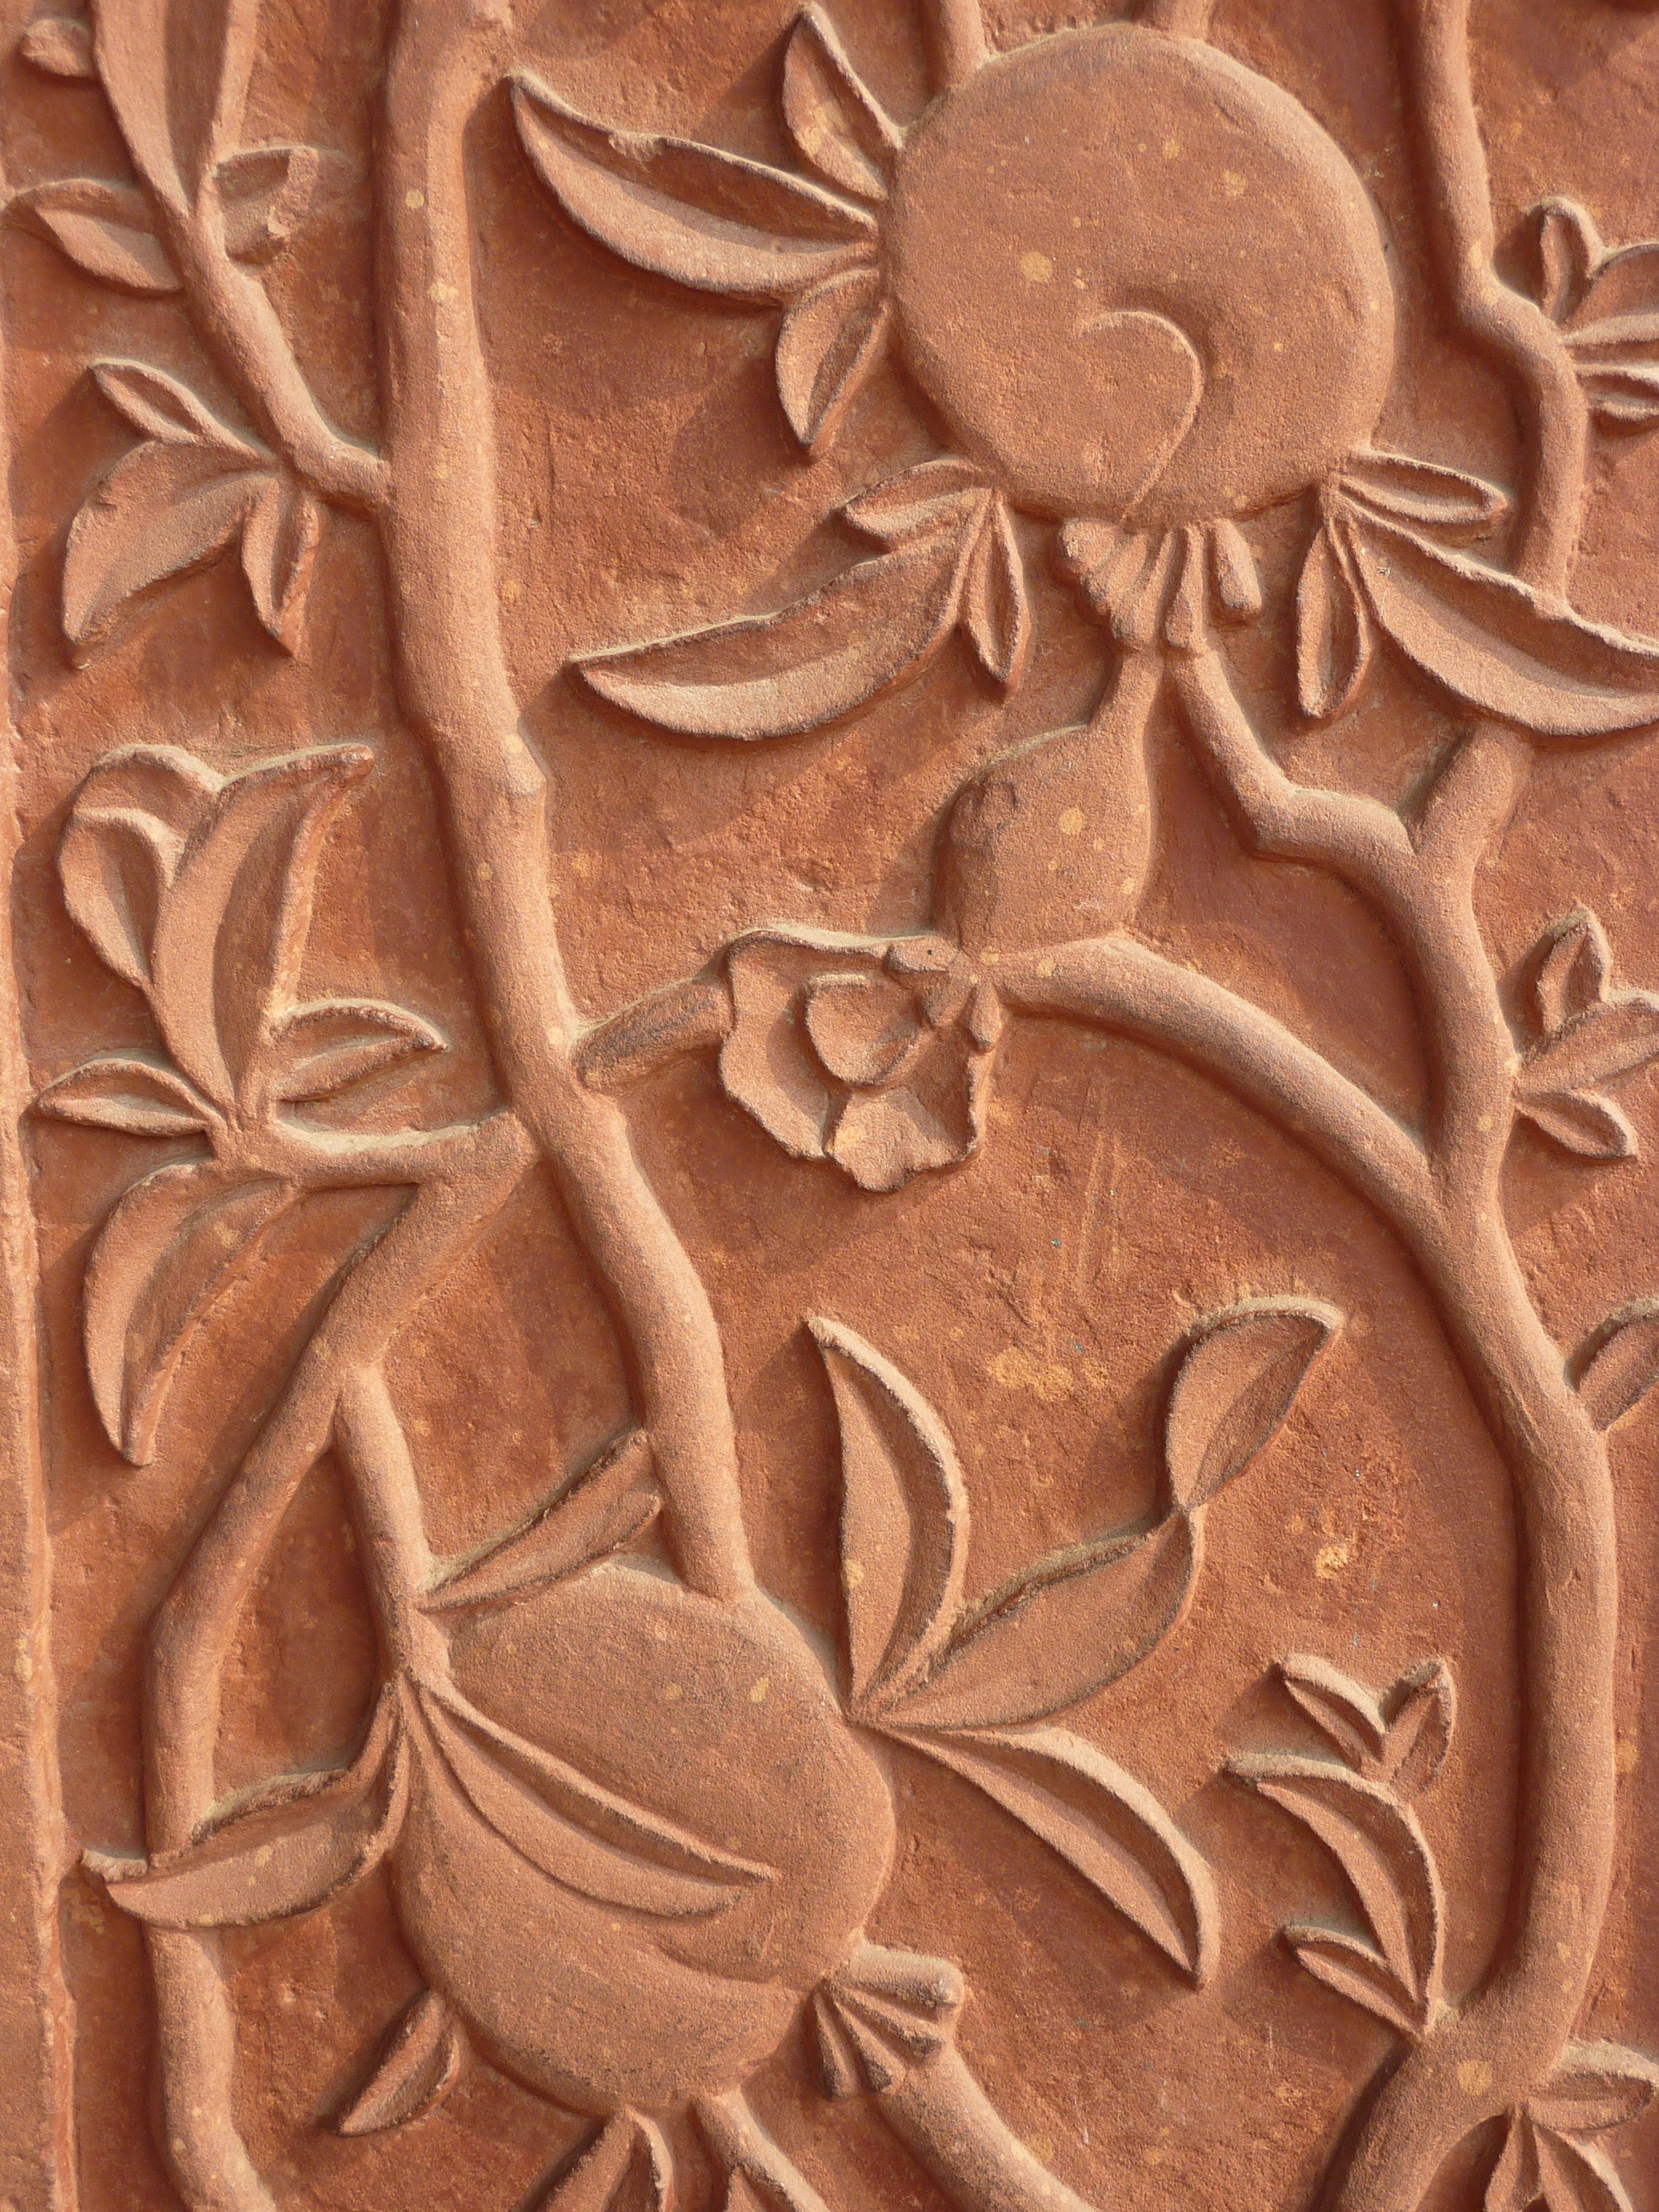 floral vine embossed clay decorative